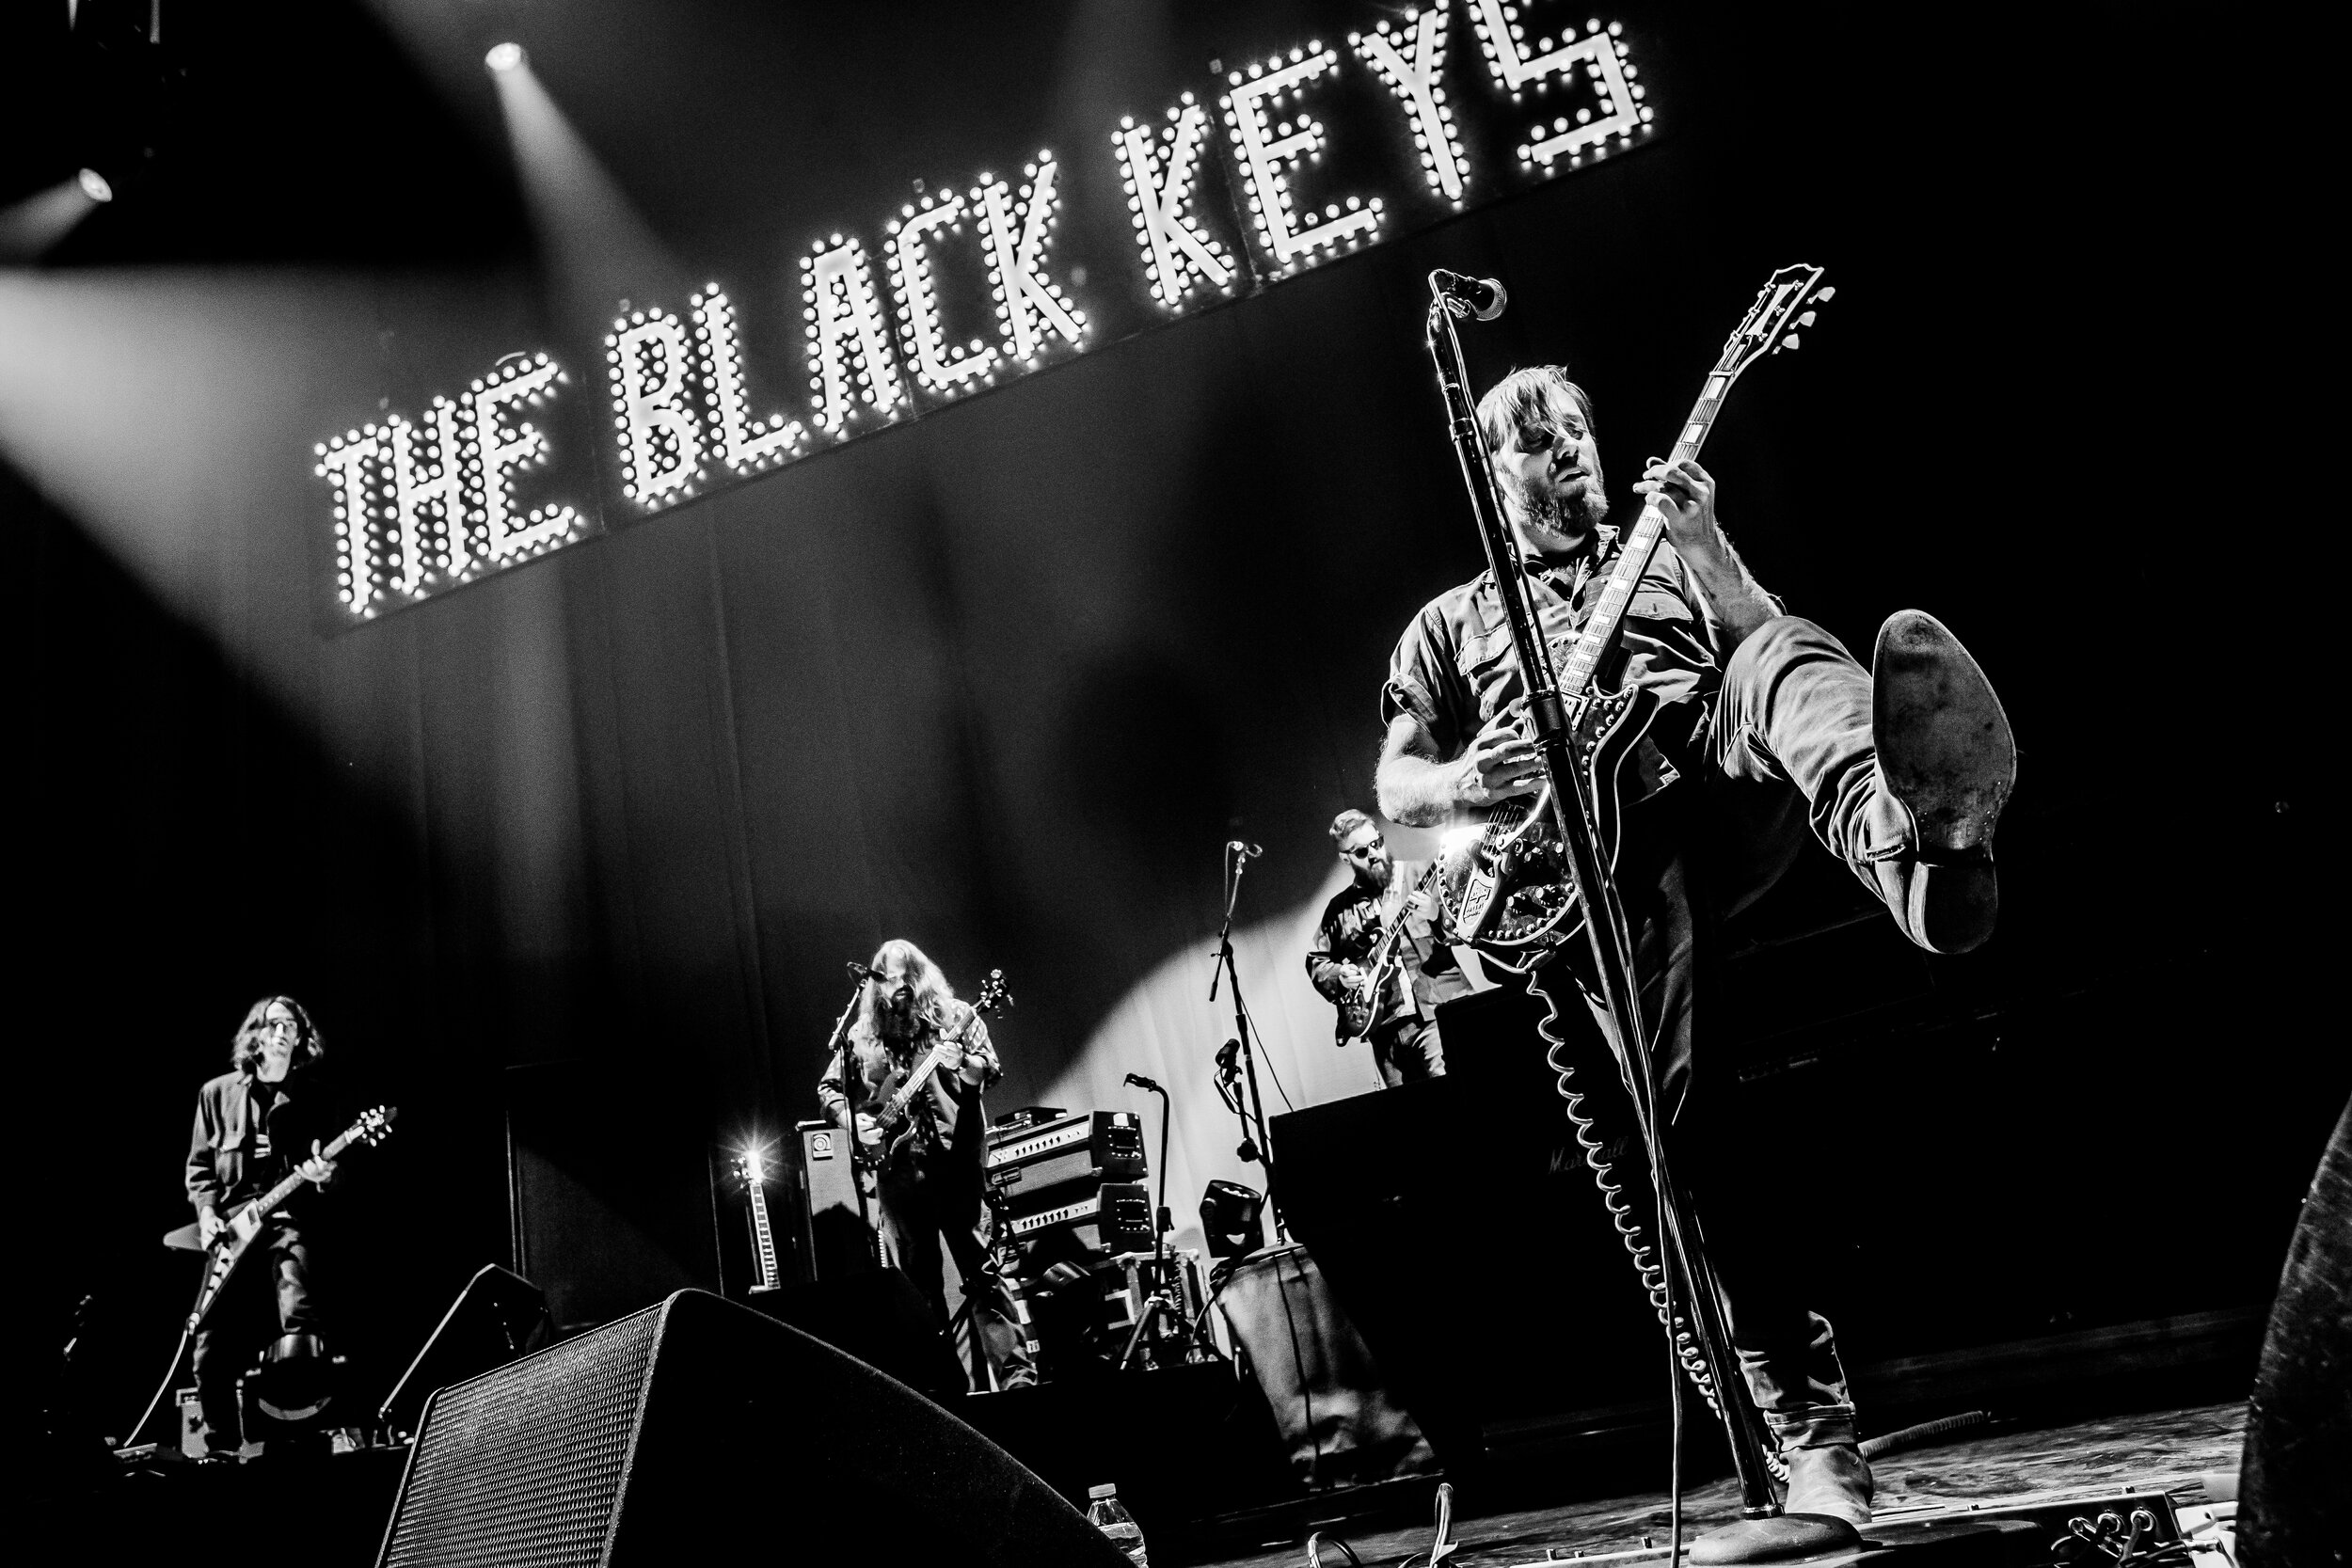 THE BLACK KEYS + MODEST MOUSE + REPEAT REPEAT